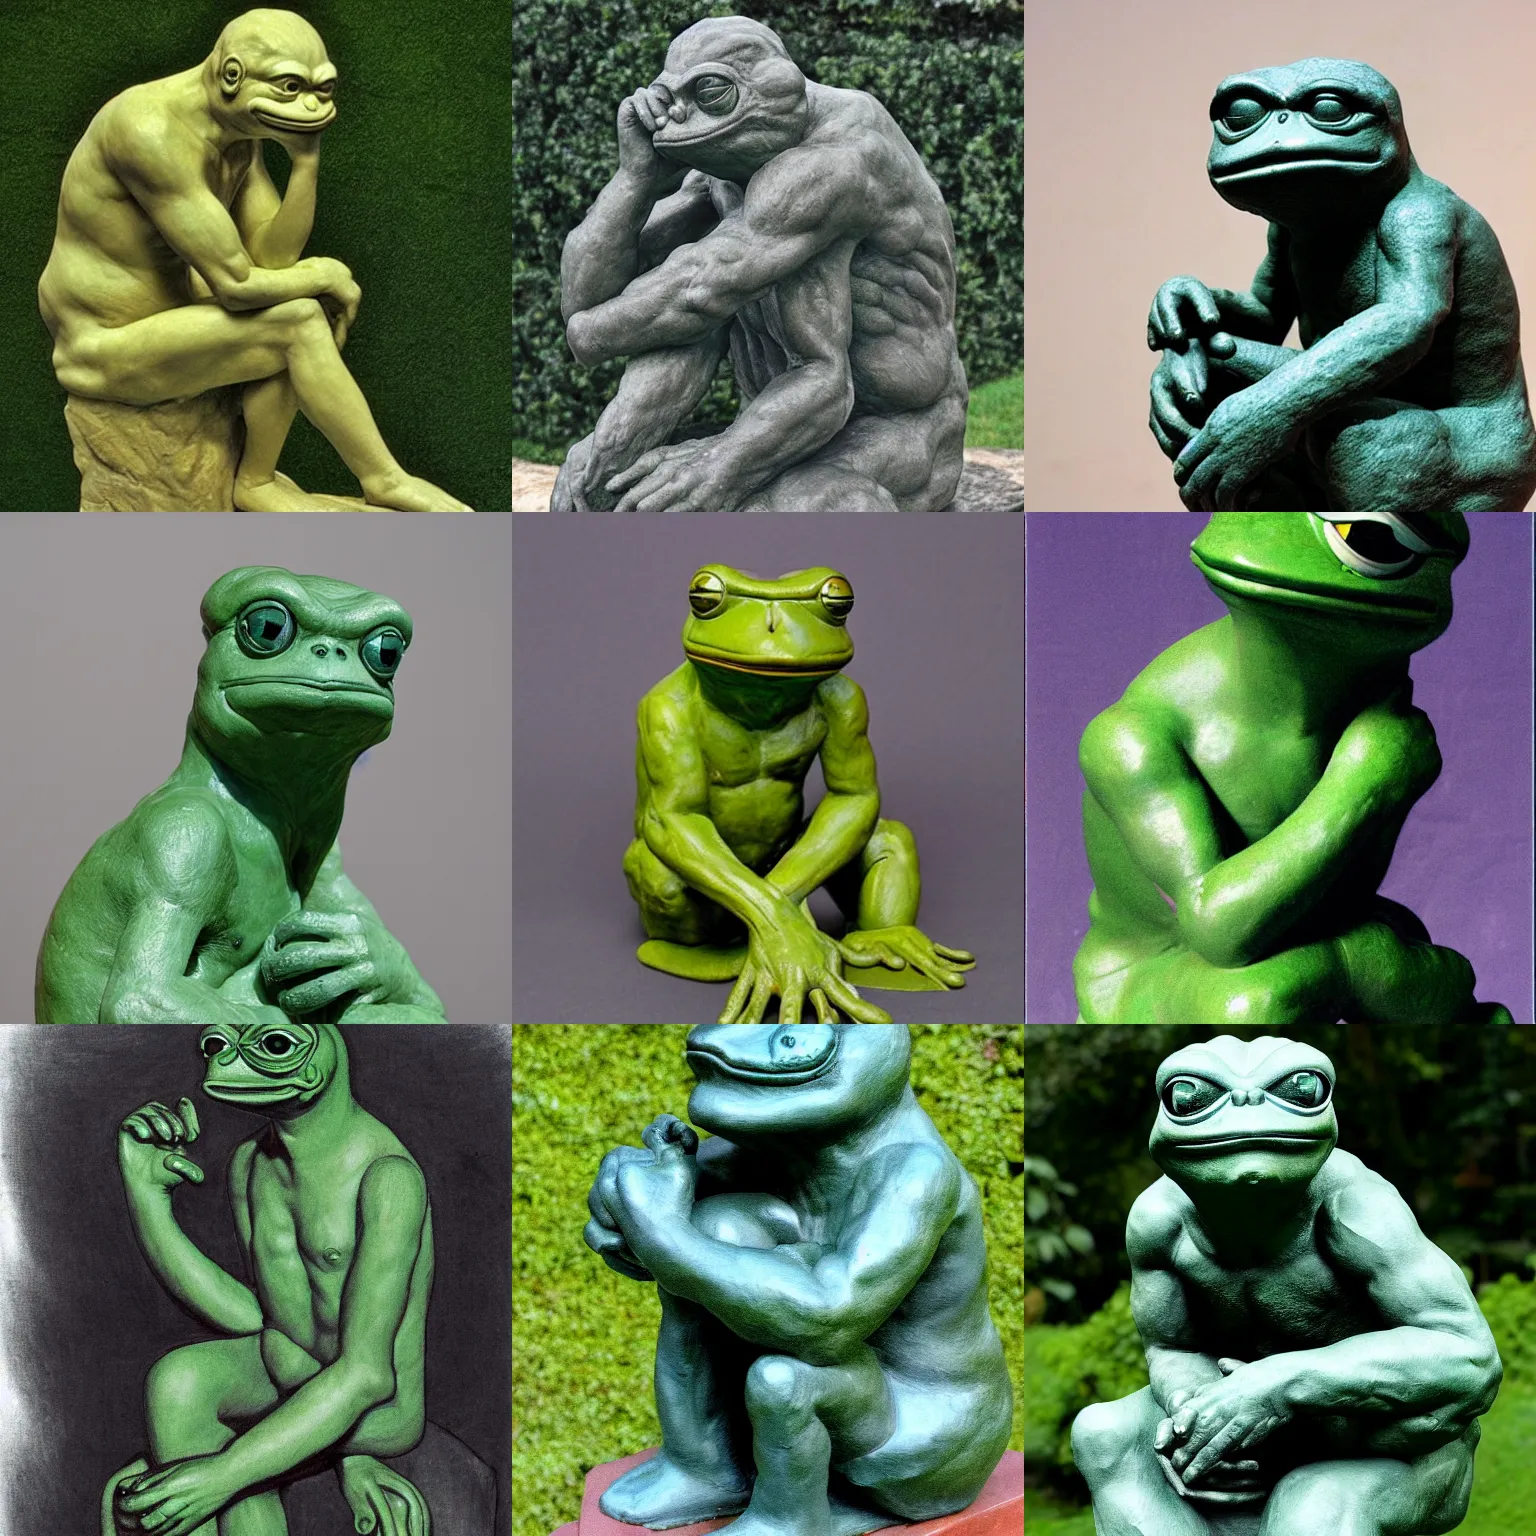 Prompt: the thinker pepe the frog by Auguste Rodin